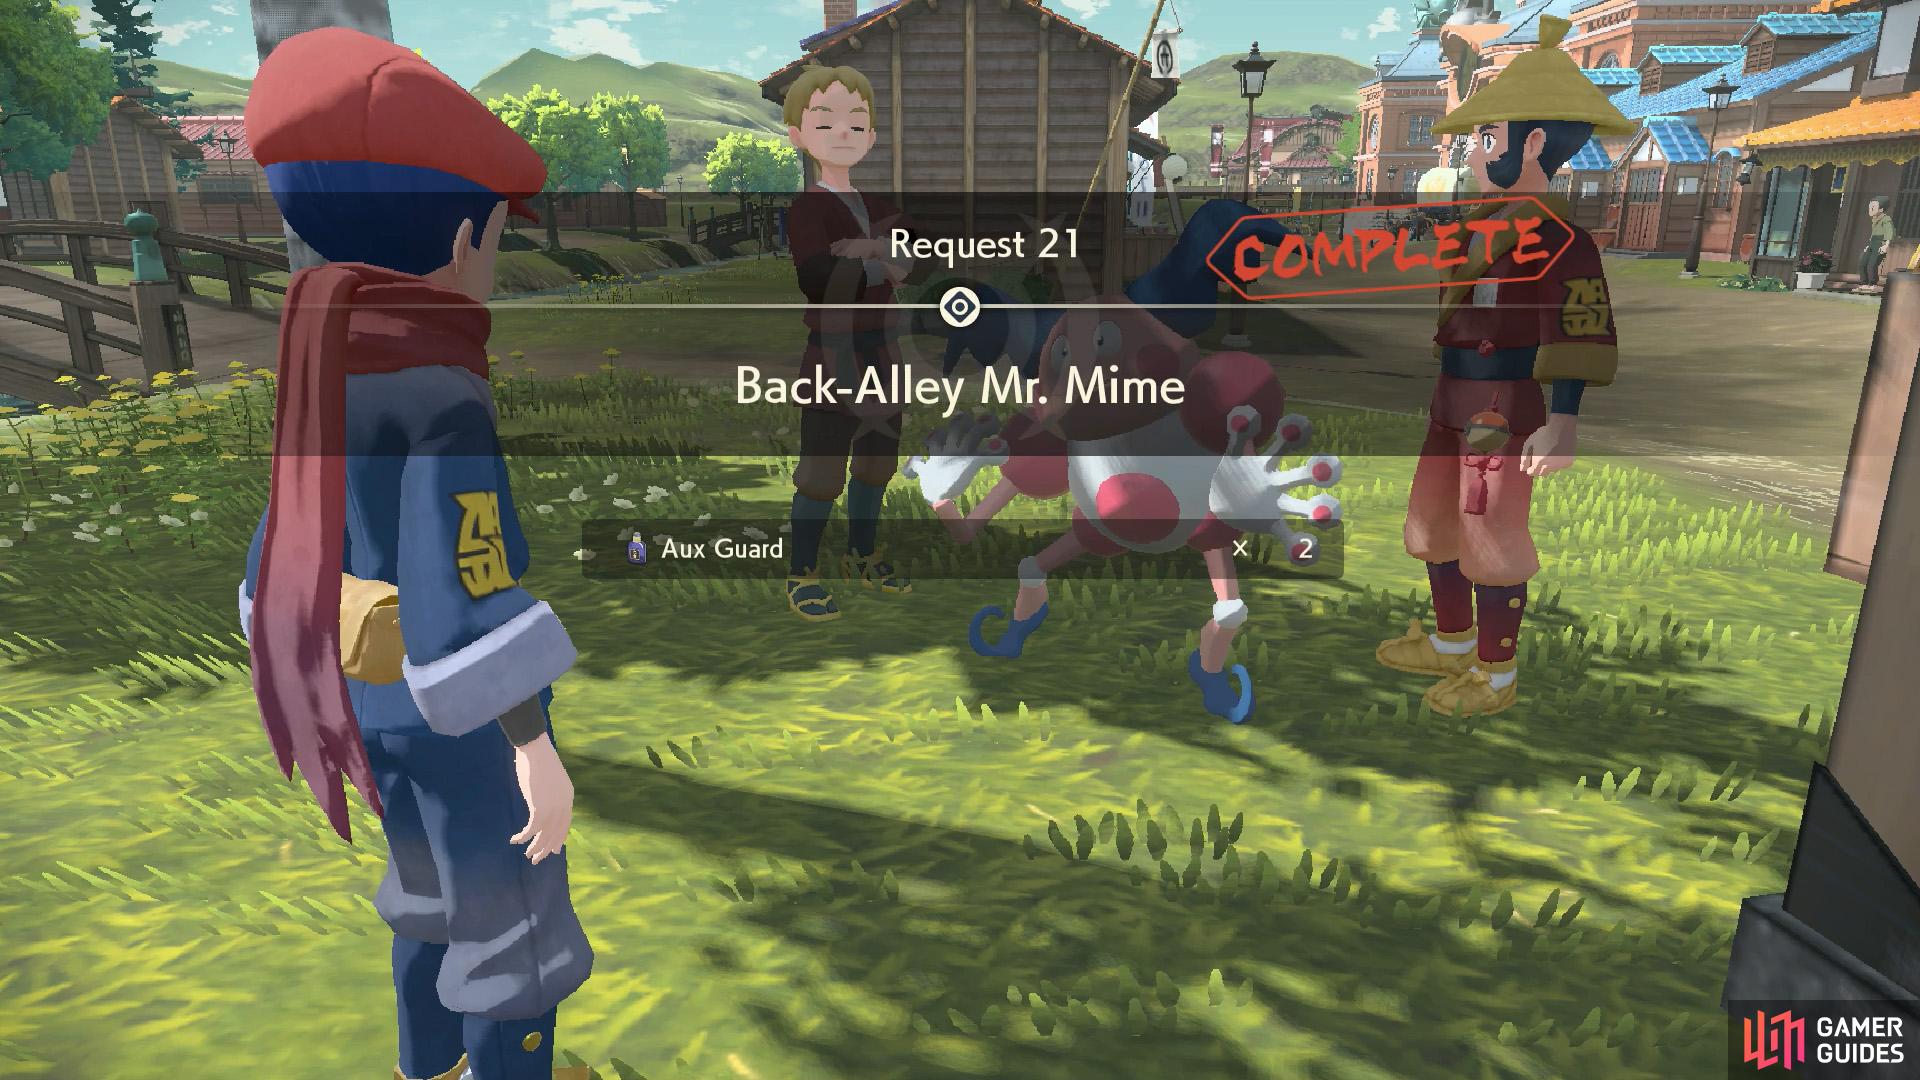 Who'd have thought Mr. Mime would make a great gatekeeper?